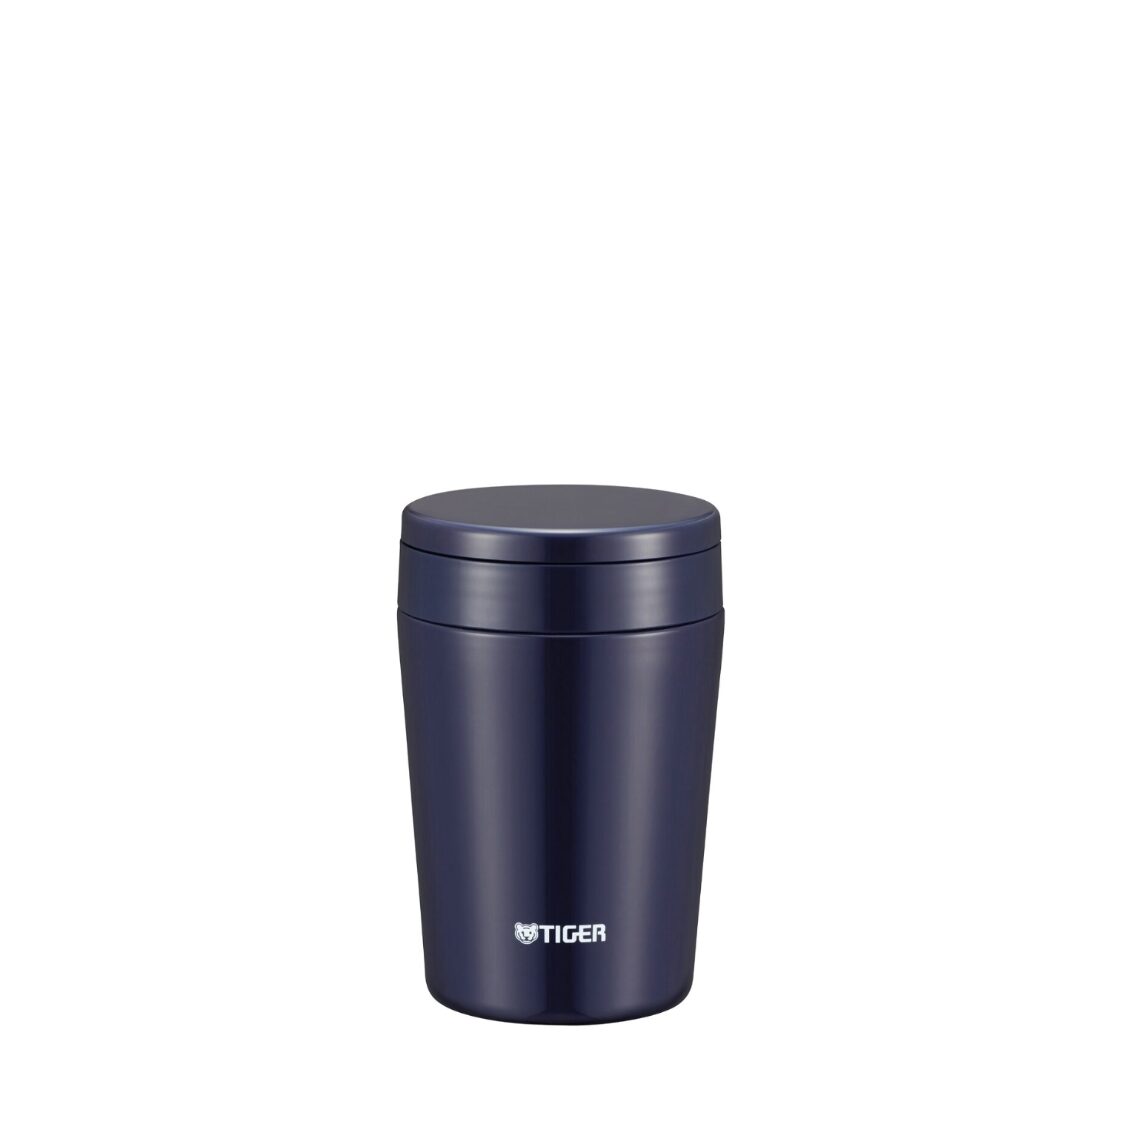 https://media.metro.sg/ProductImages/286b3674-ed39-4036-9e73-add3d41a2f66/2/std/tiger-double-stainless-steel-thermal-soup-cup-380ml-navy-mcl-b038-ai-231005101638.jpg